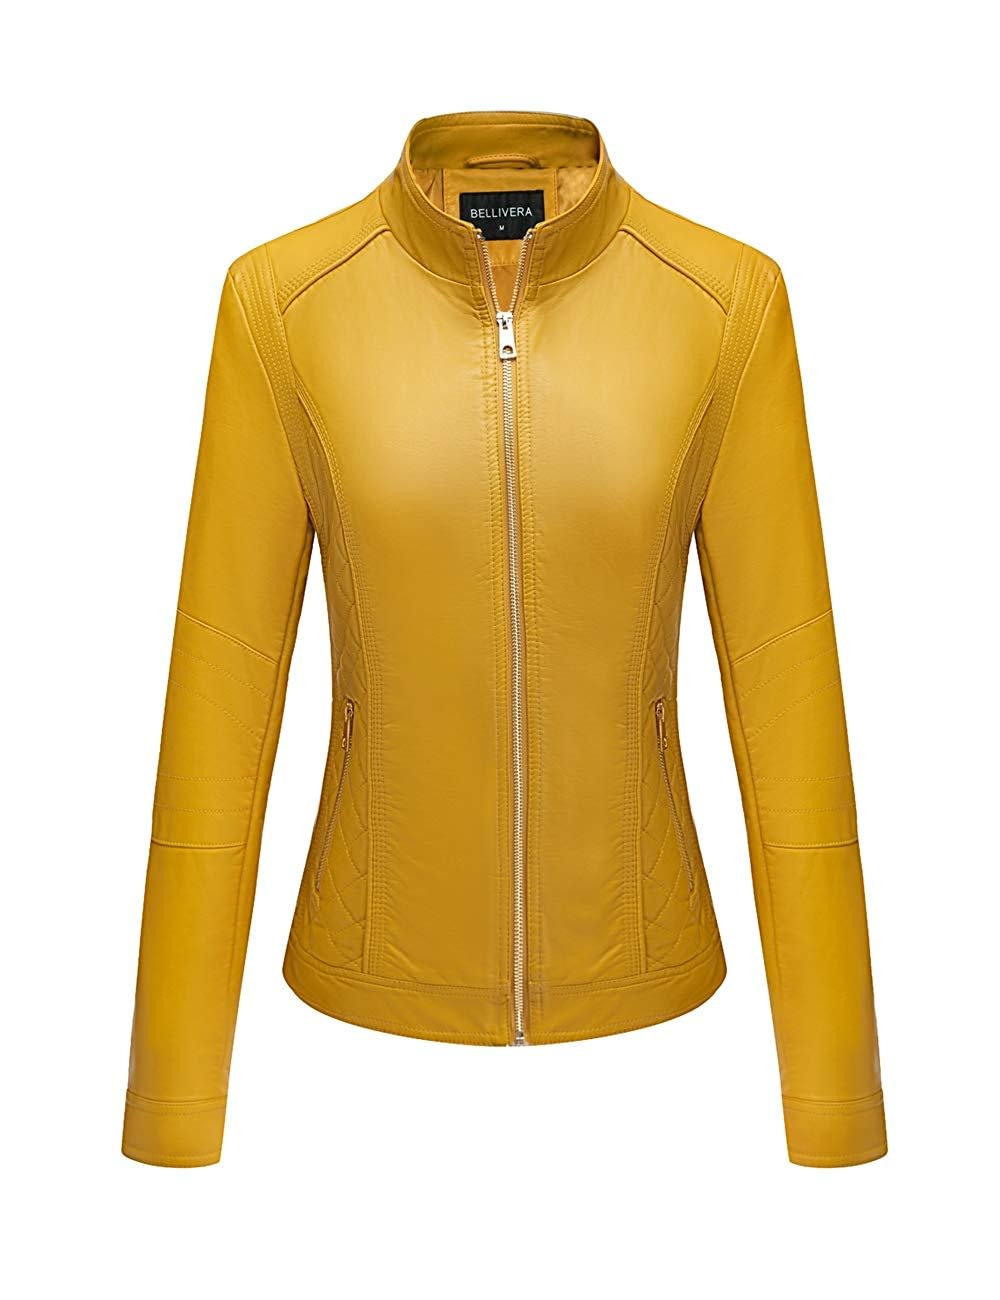 Faux Leather Jacket for women，Moto Casual Short Coat for Spring and Fall